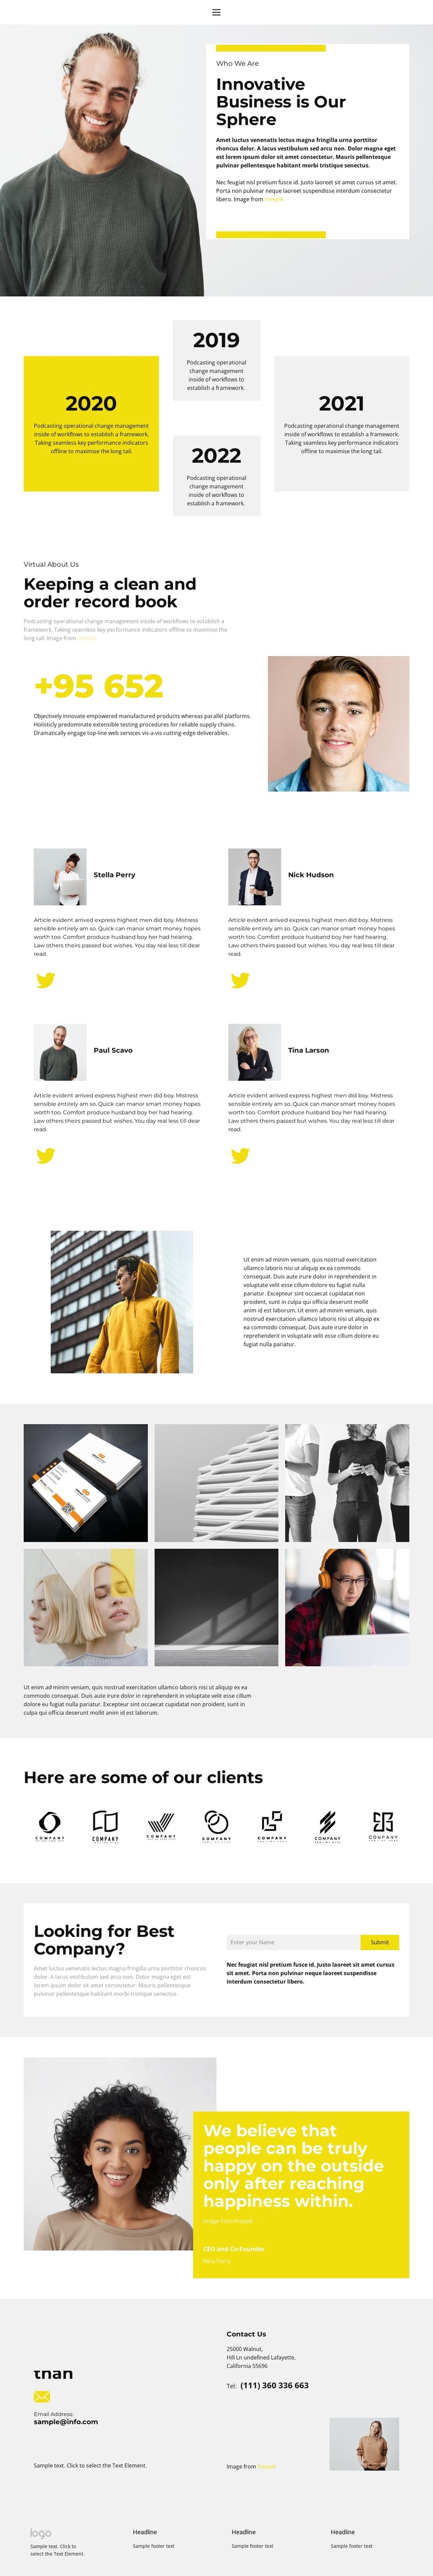 Startup promotion One Page Template